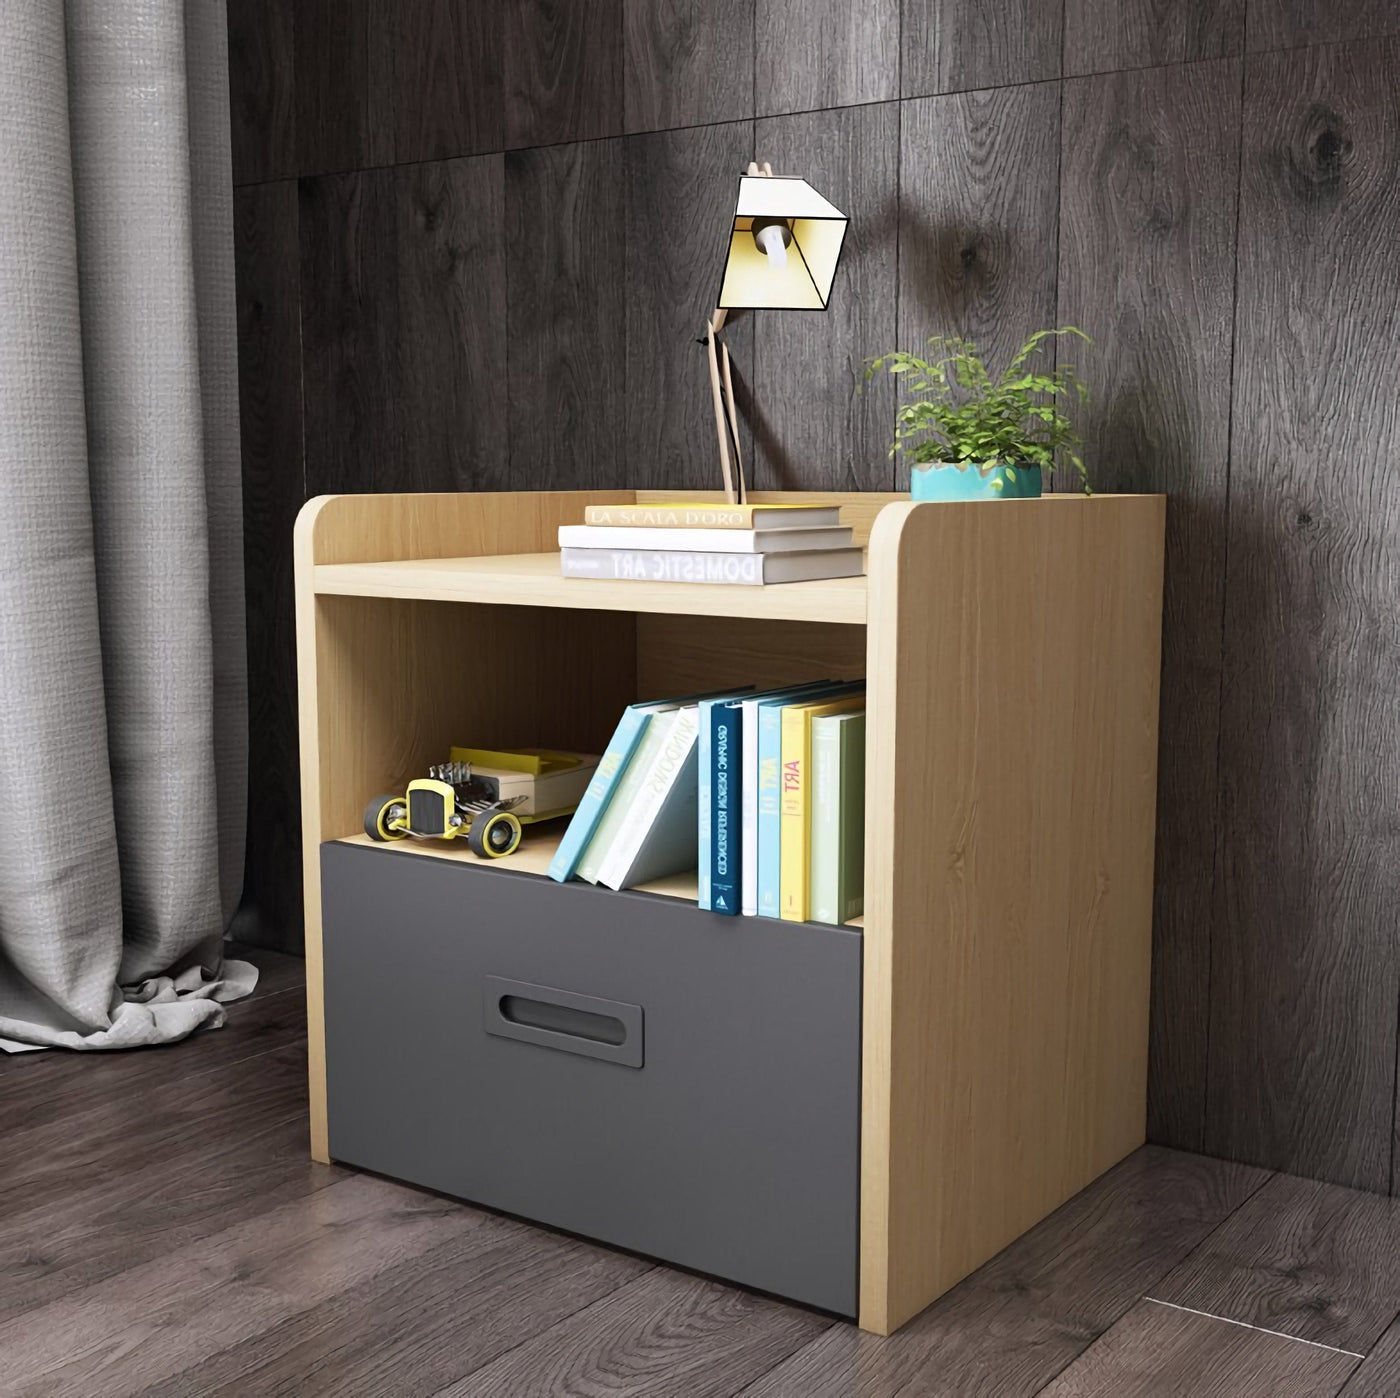 EzSpace Side Table TEOM Side Table | Space Saving & Stylish for Small Rooms | EzSpace